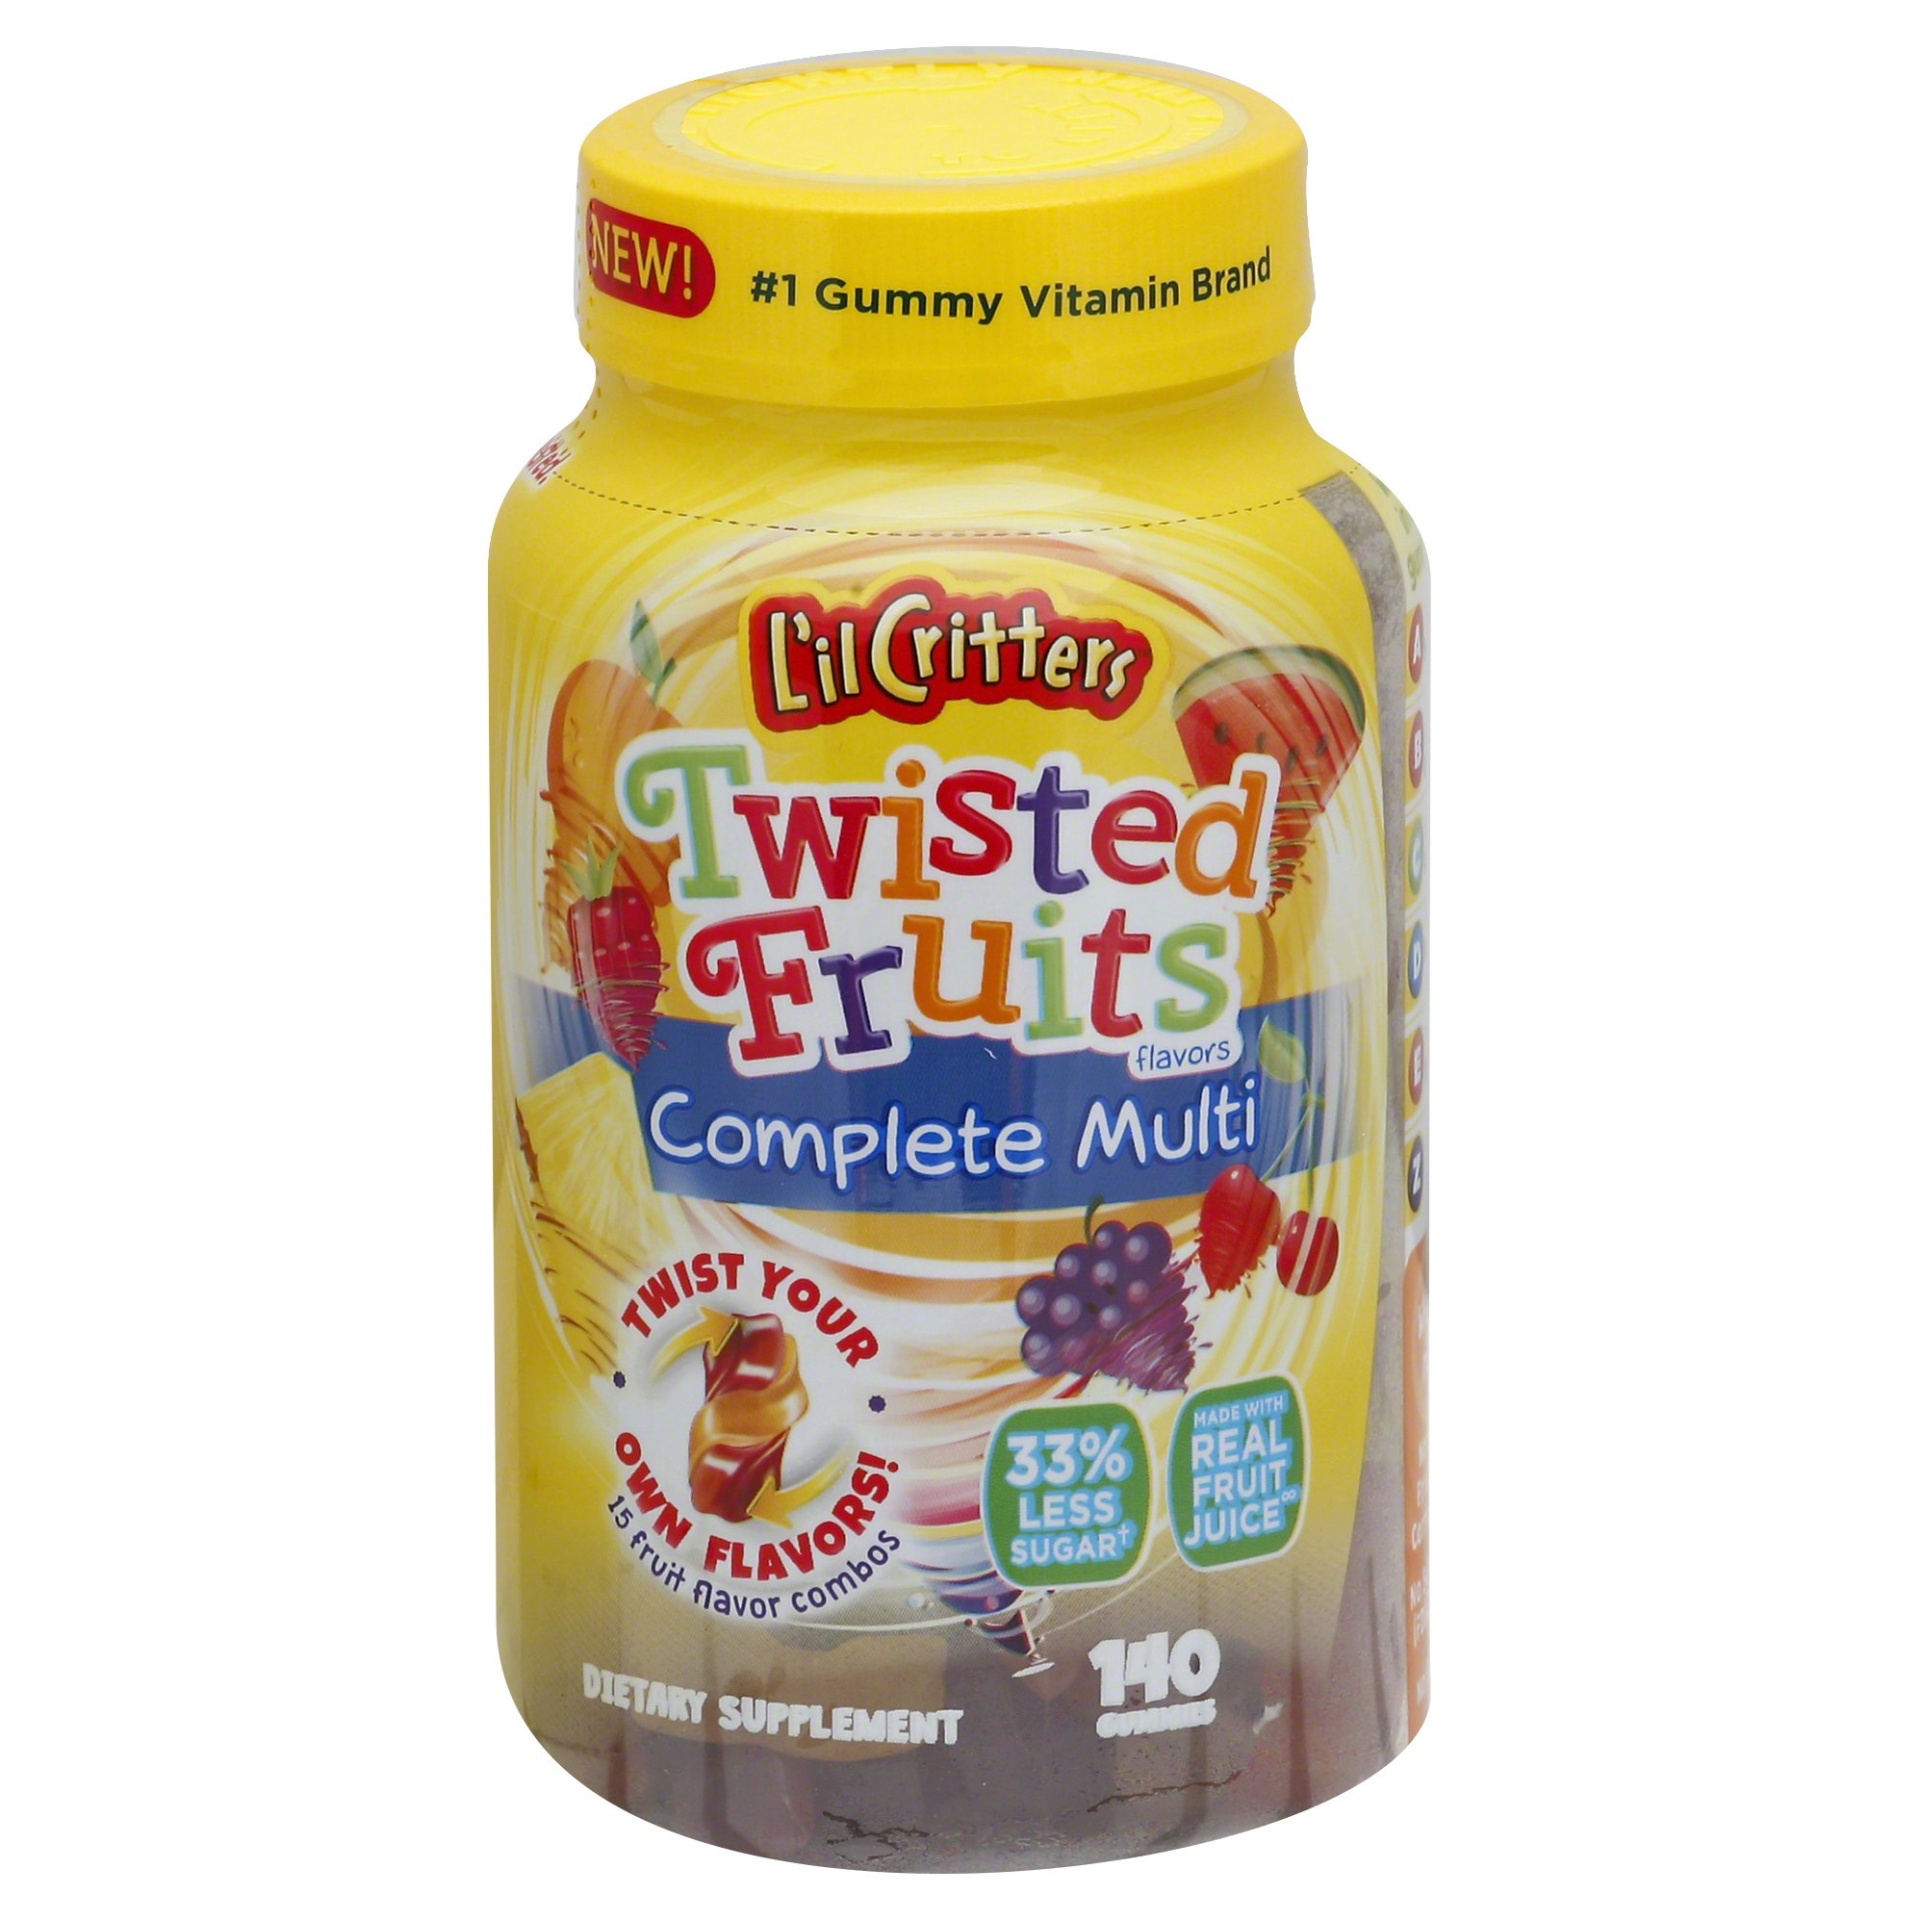 slide 1 of 4, L'il Critters Twisted Fruits Complete Multi Dietary Supplement Gummies, 140 ct